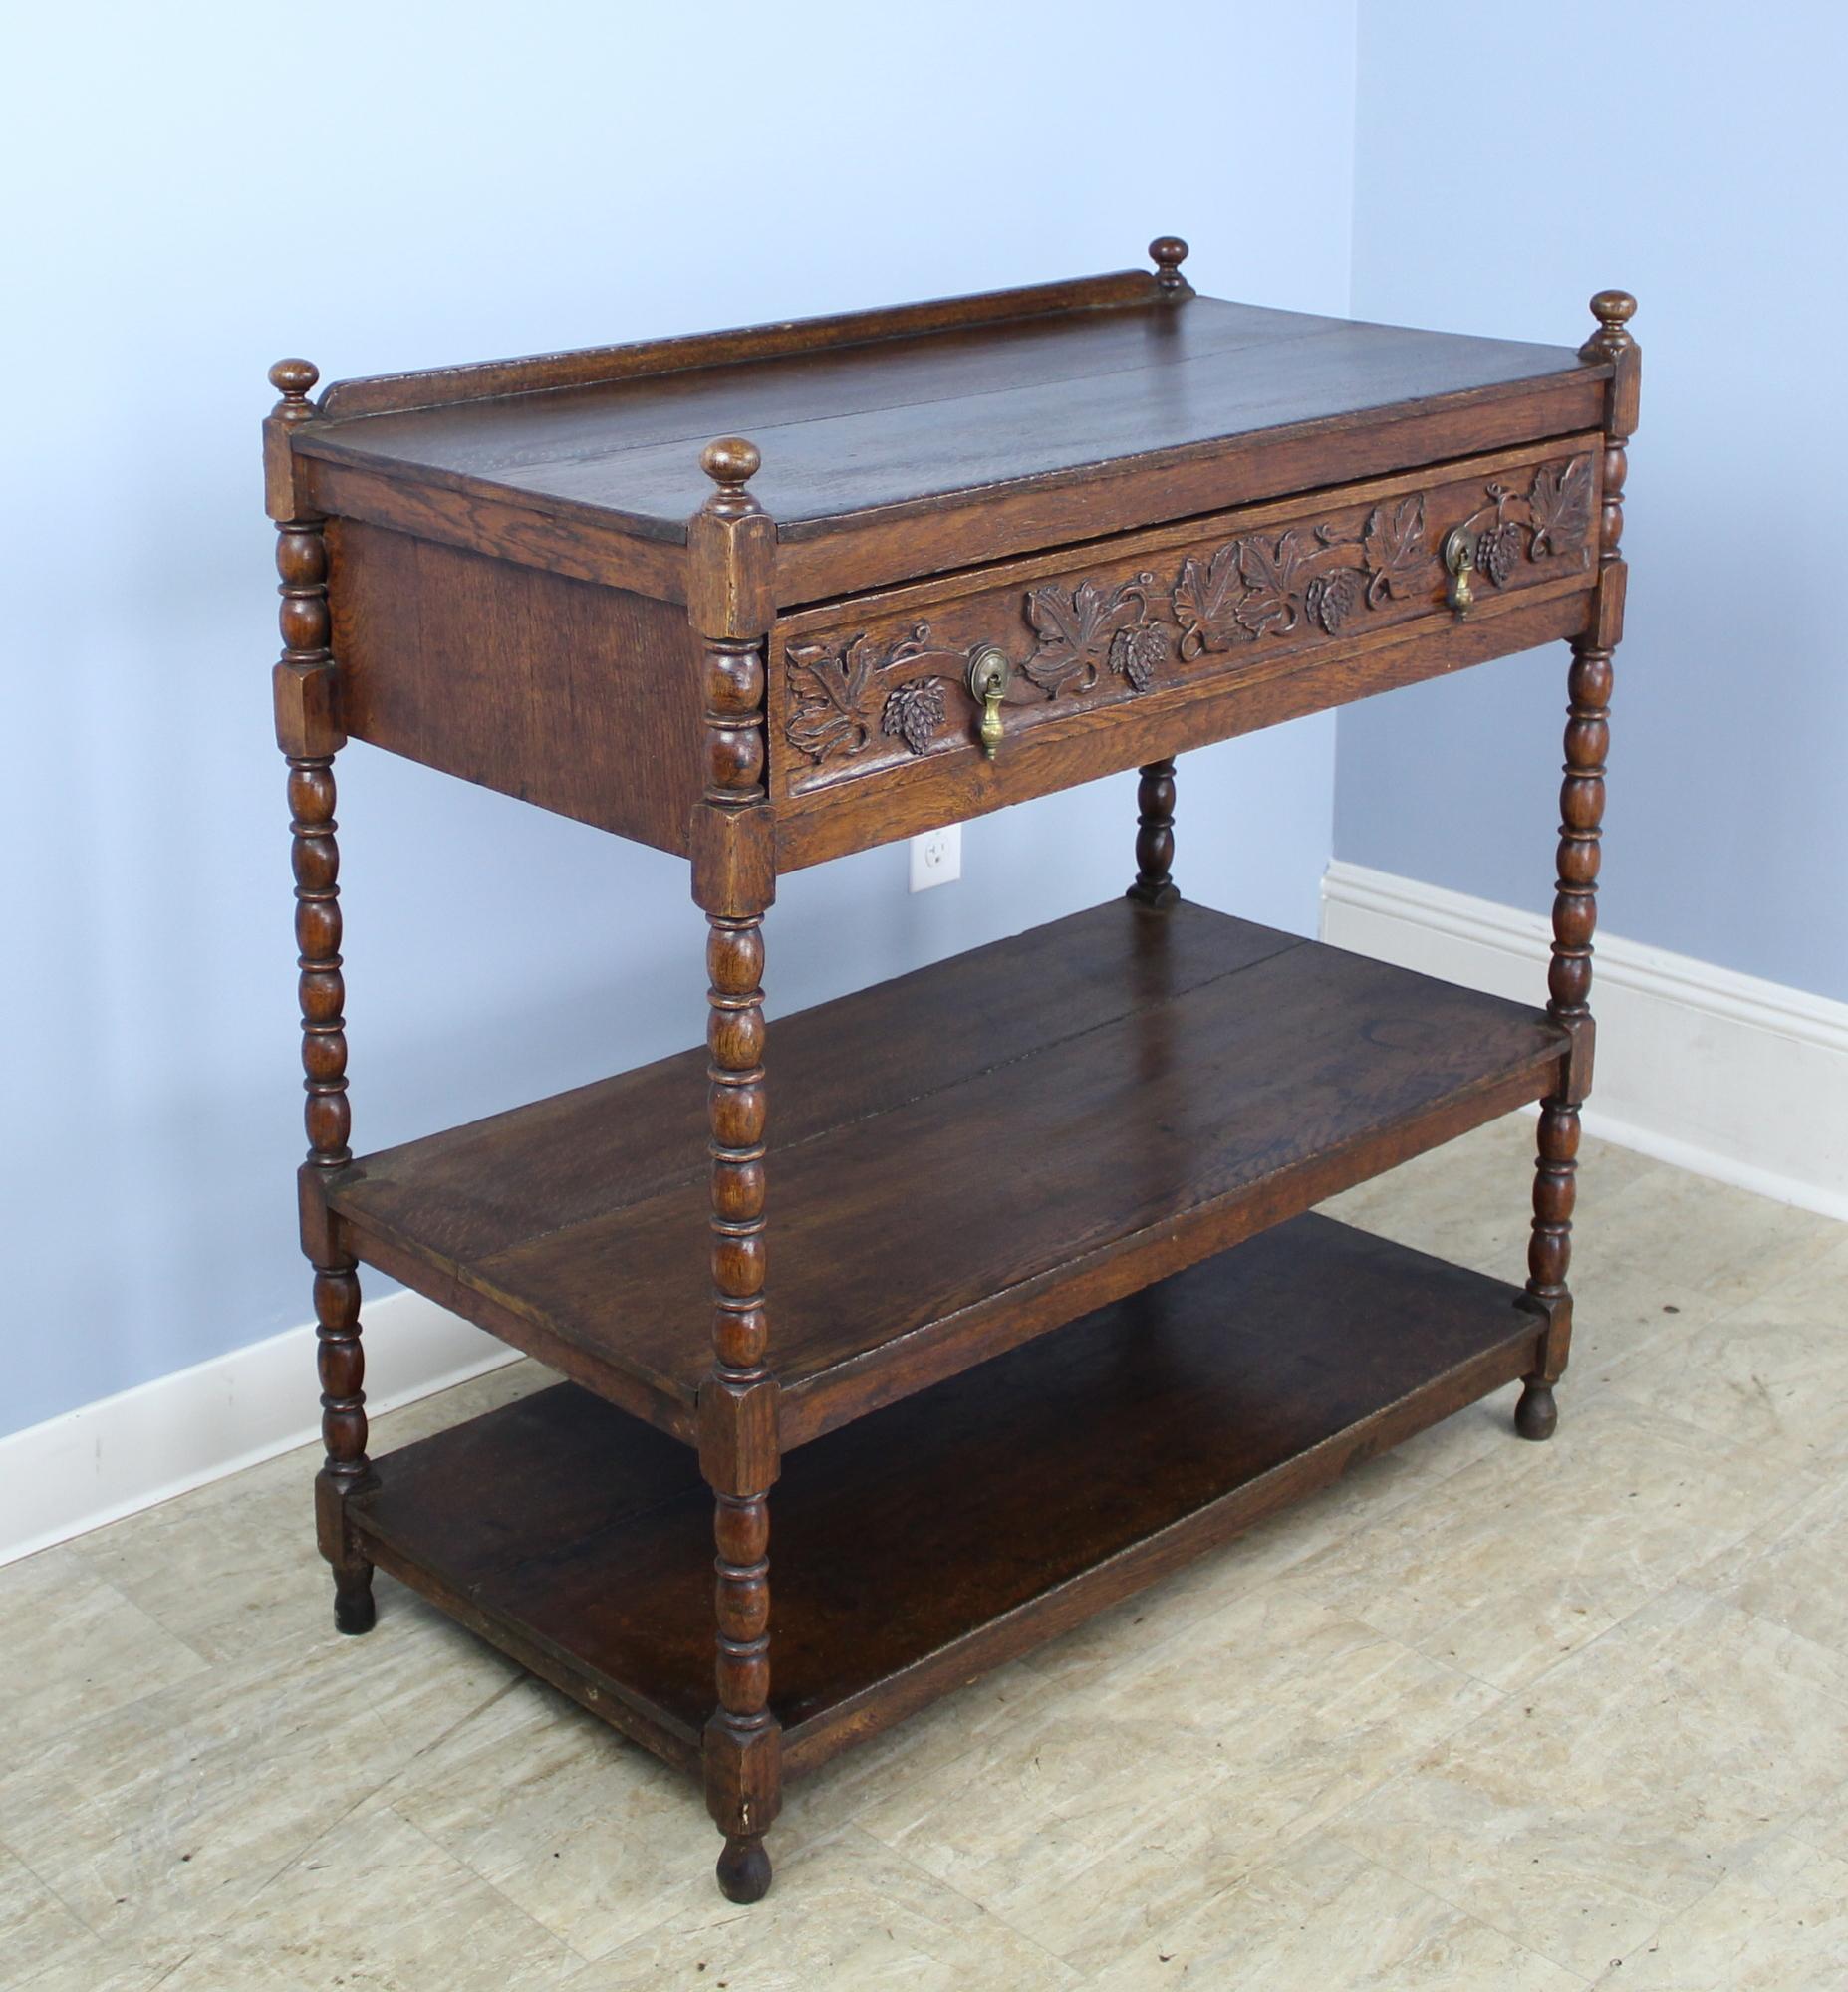 A three-tier dumbwaiter or serving piece with a single large drawer, hand carved with grapes and leaves. The oak has a lovely grain and patina. Height measurement is for total height of the piece.